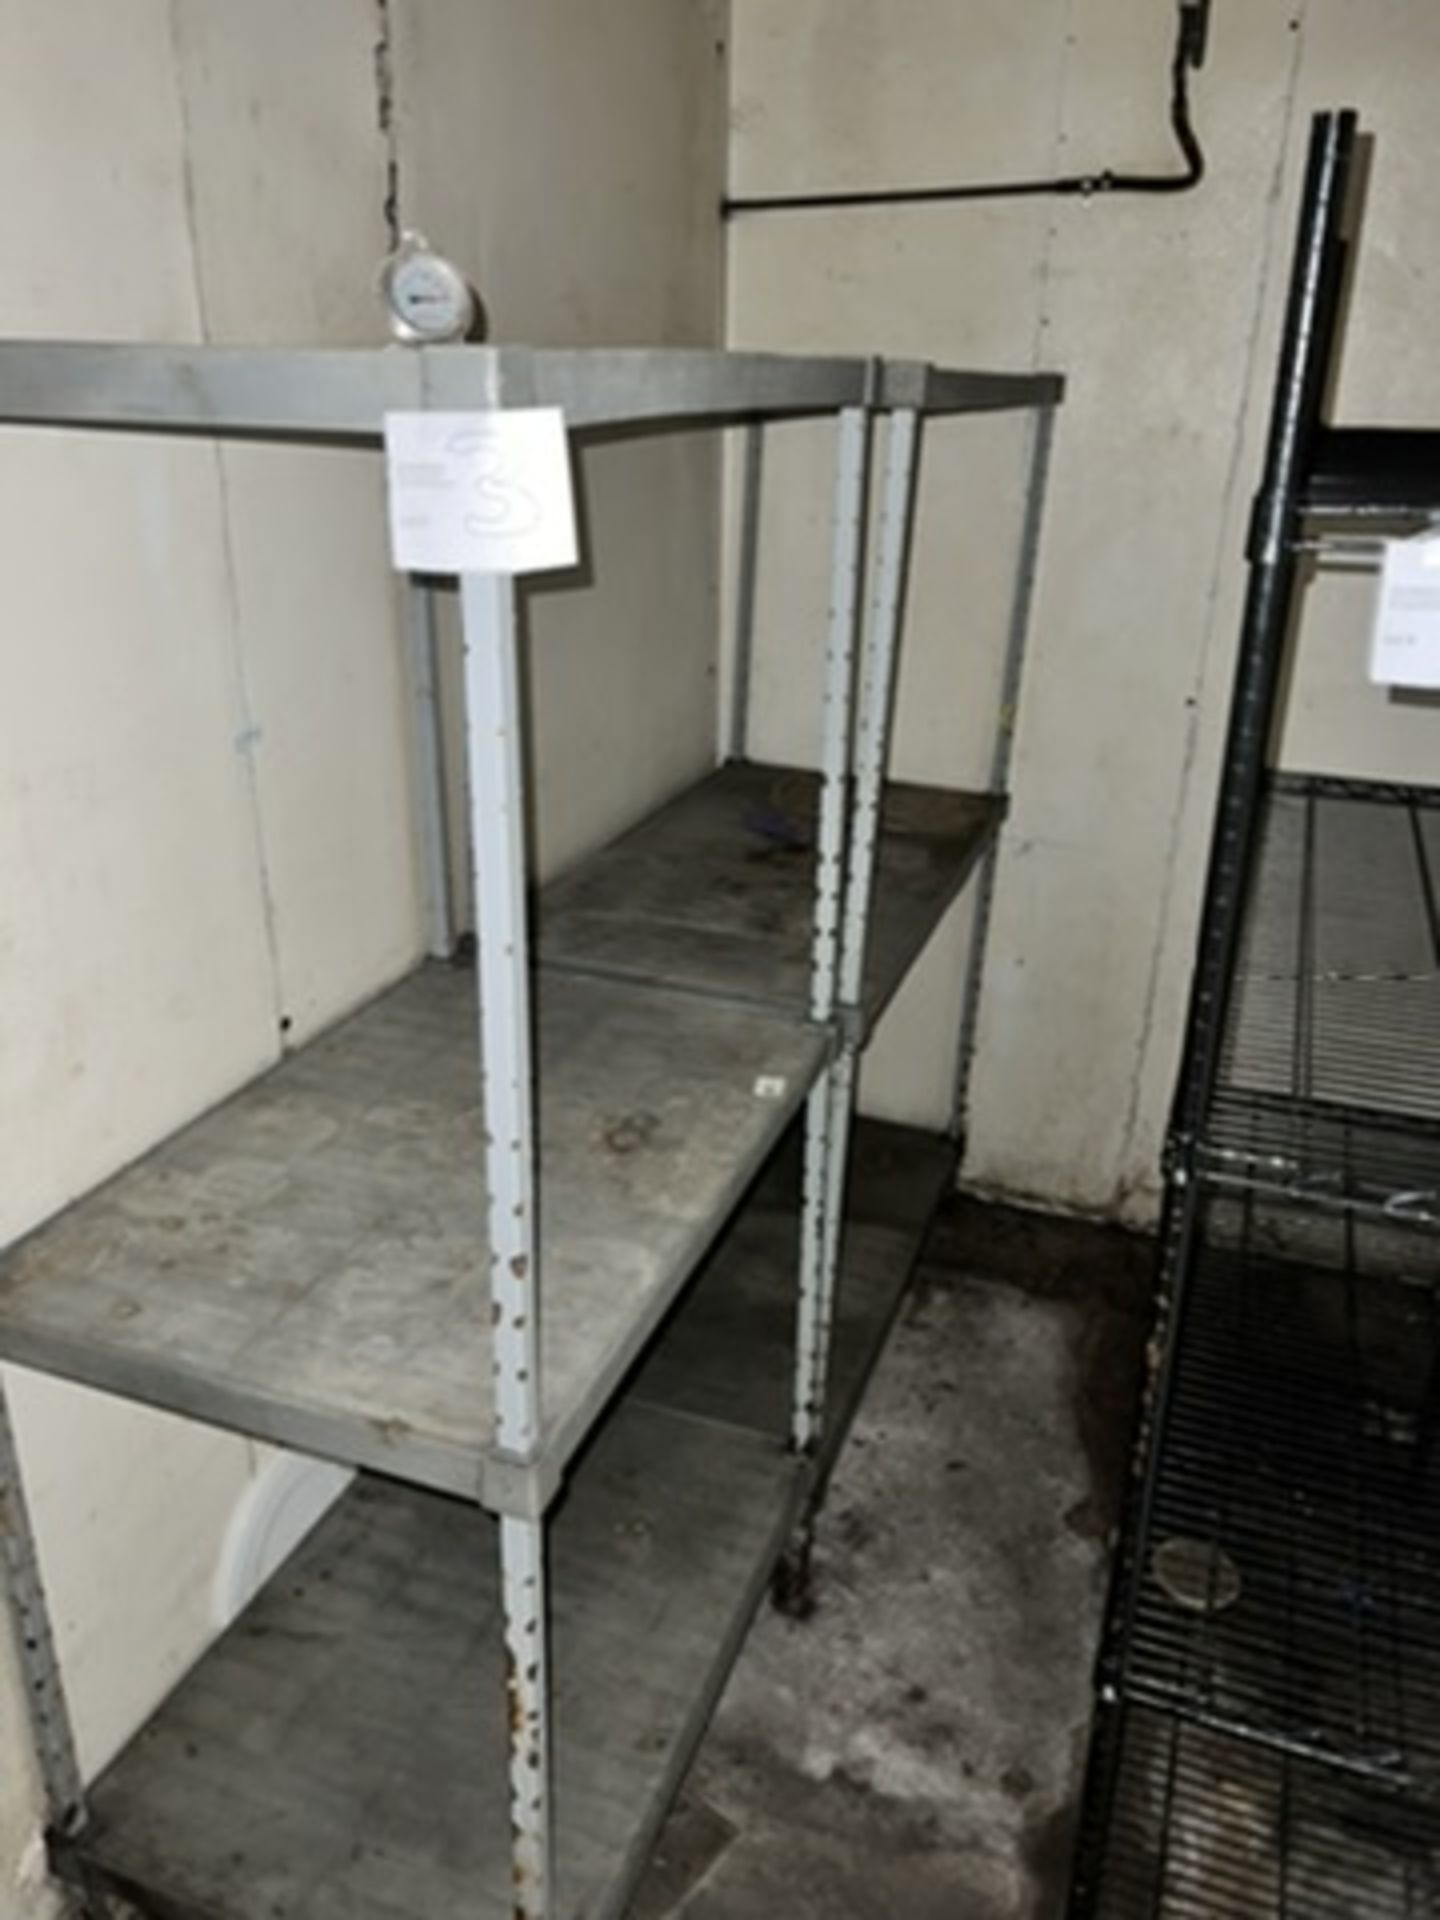 Lot of: (1) 3' wide, 3-tier metal shelving unit and (1) 4' wide, 3-tier metal shelving unit. - Image 3 of 5